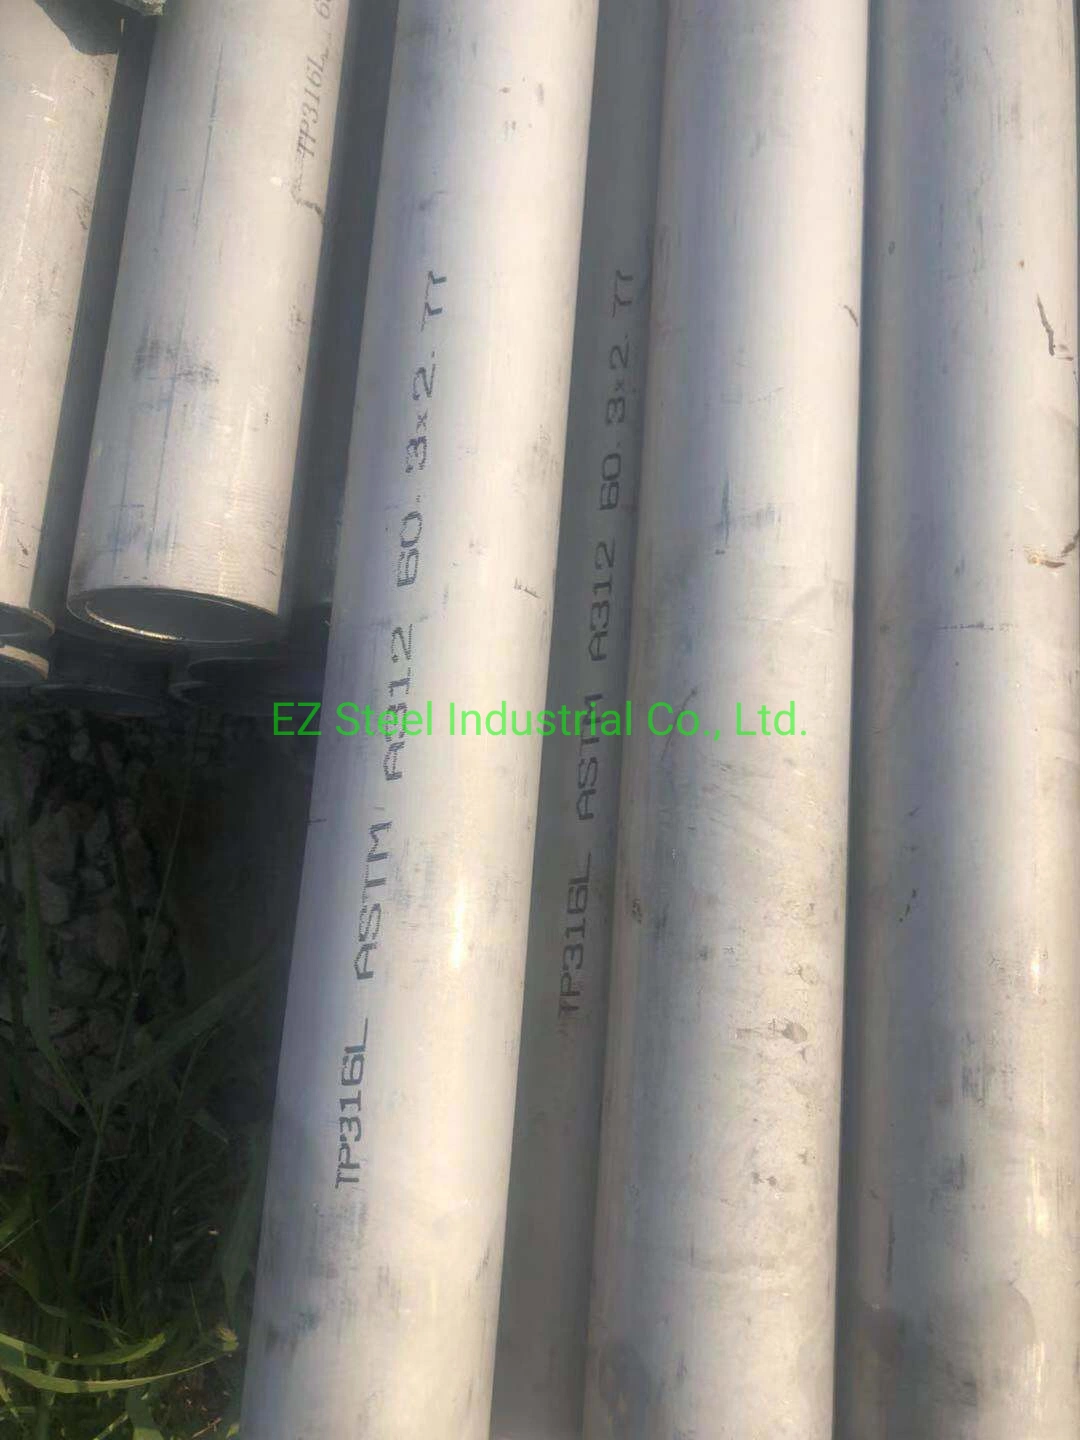 Seamless Stainless Steel Tube ASTM A213 for Metallurgy, Mineral and Energy